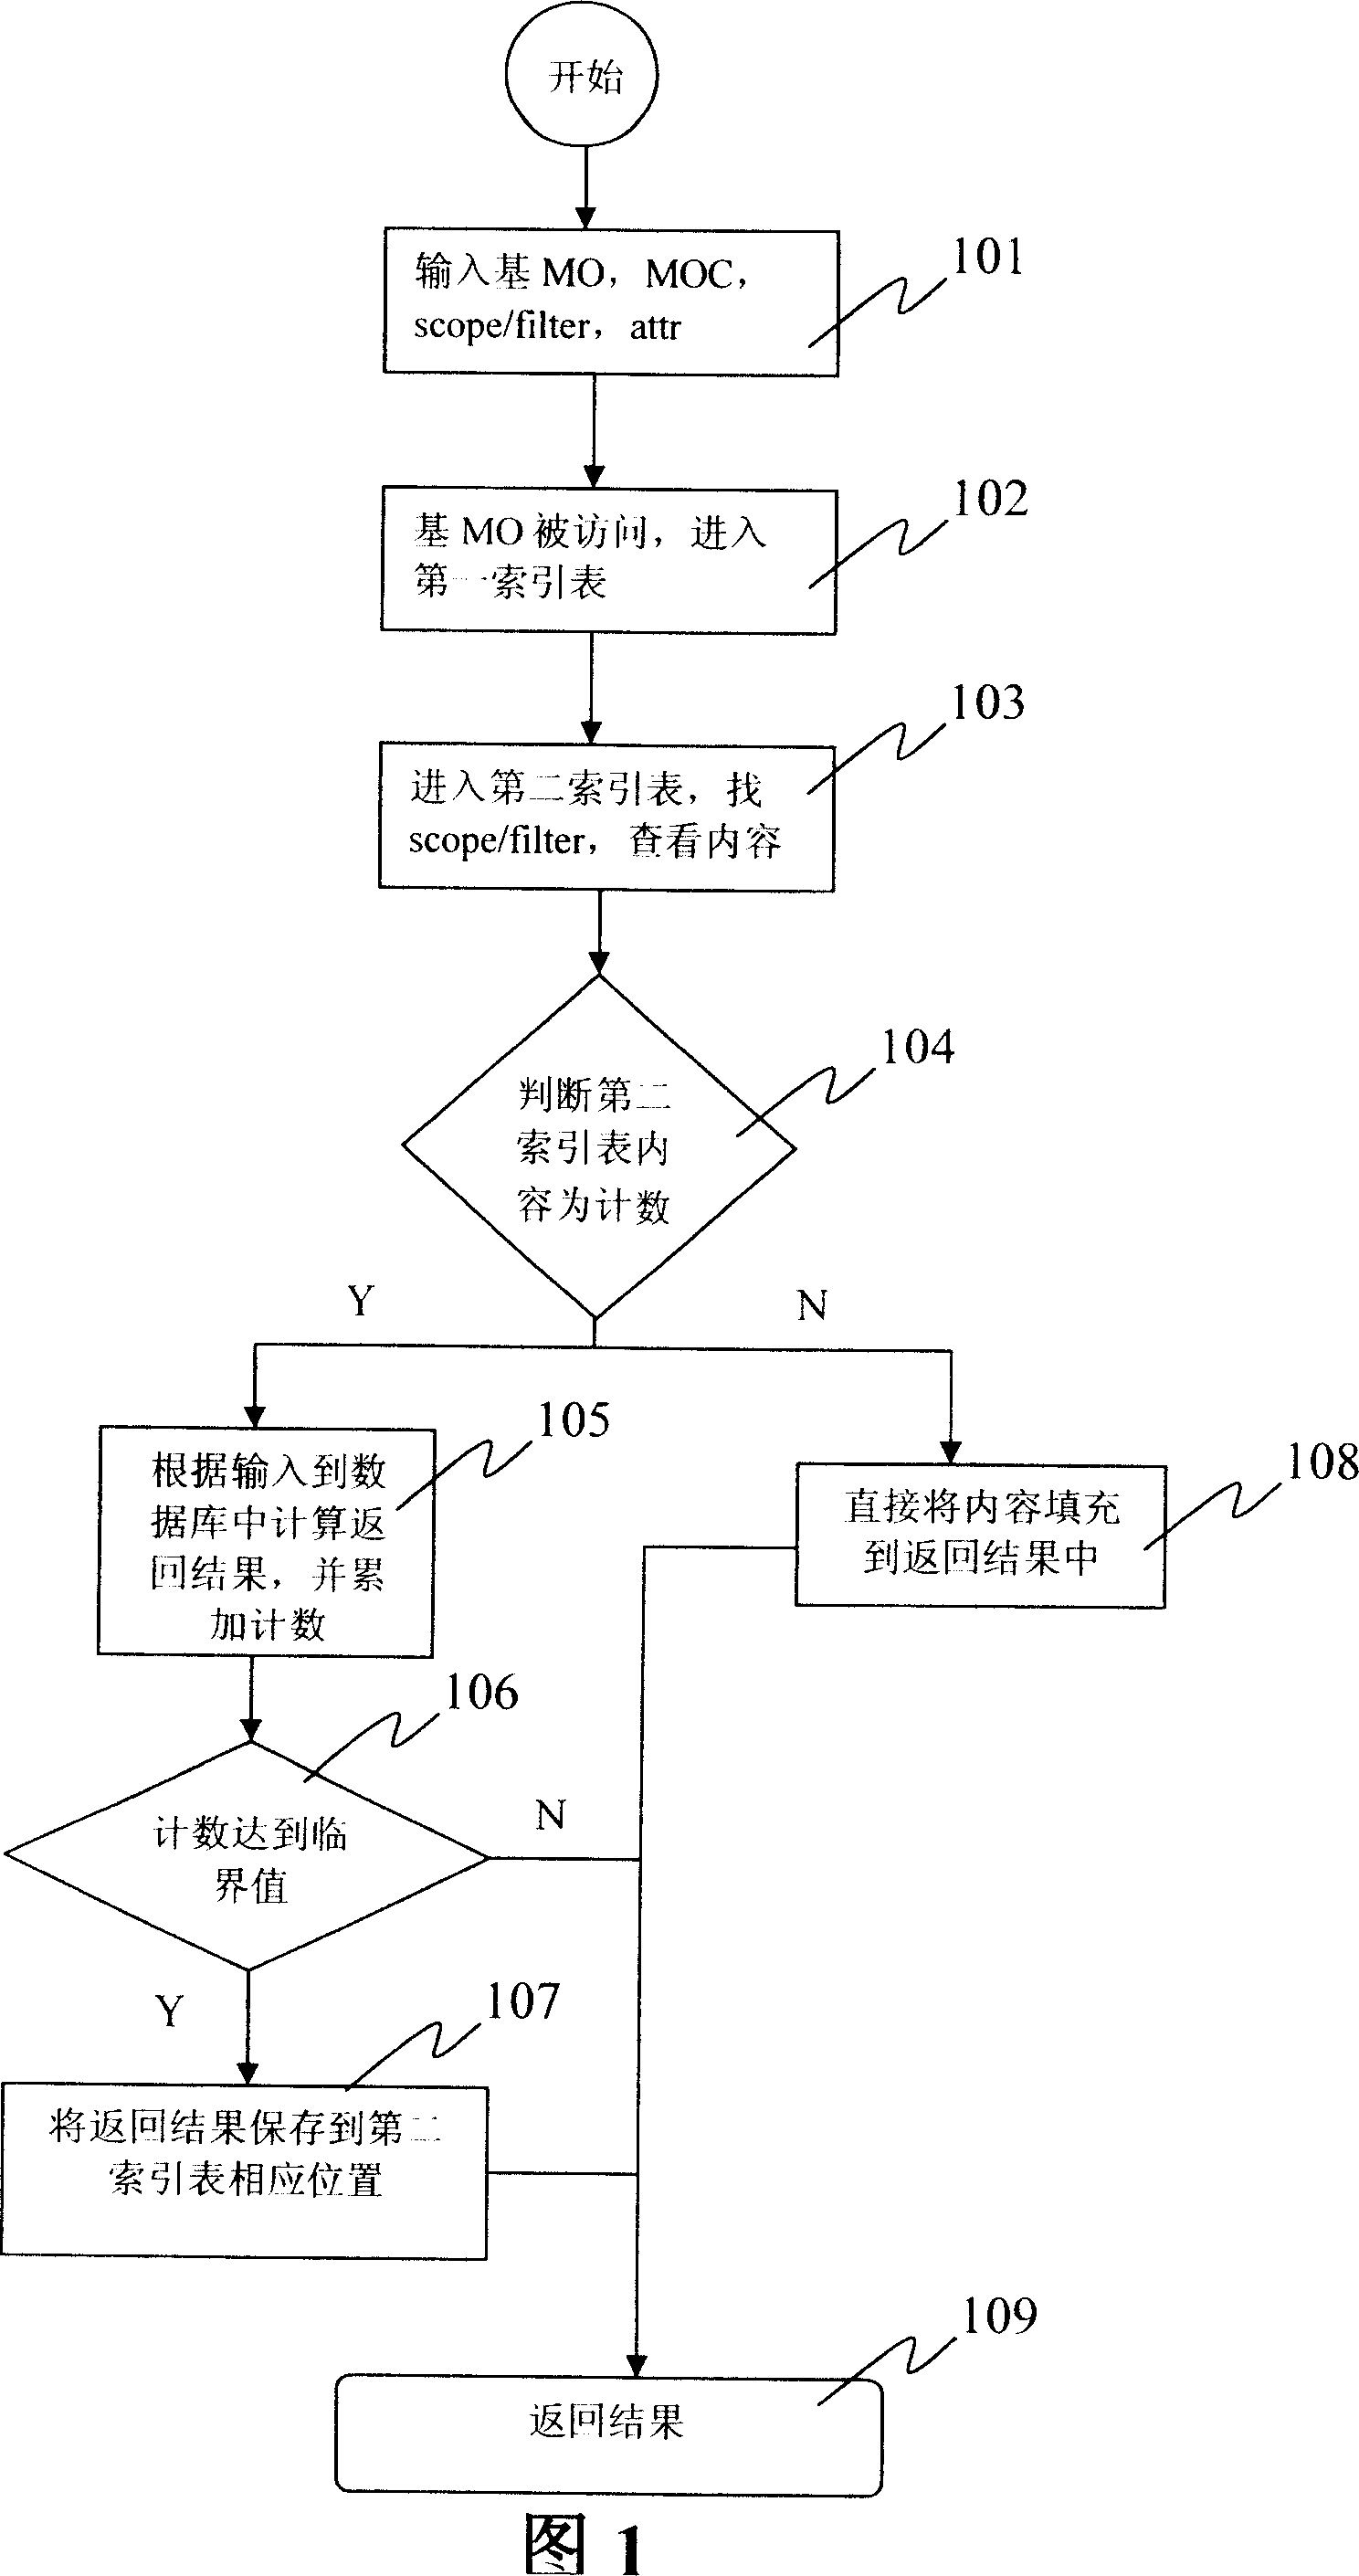 Method to rapid access information model